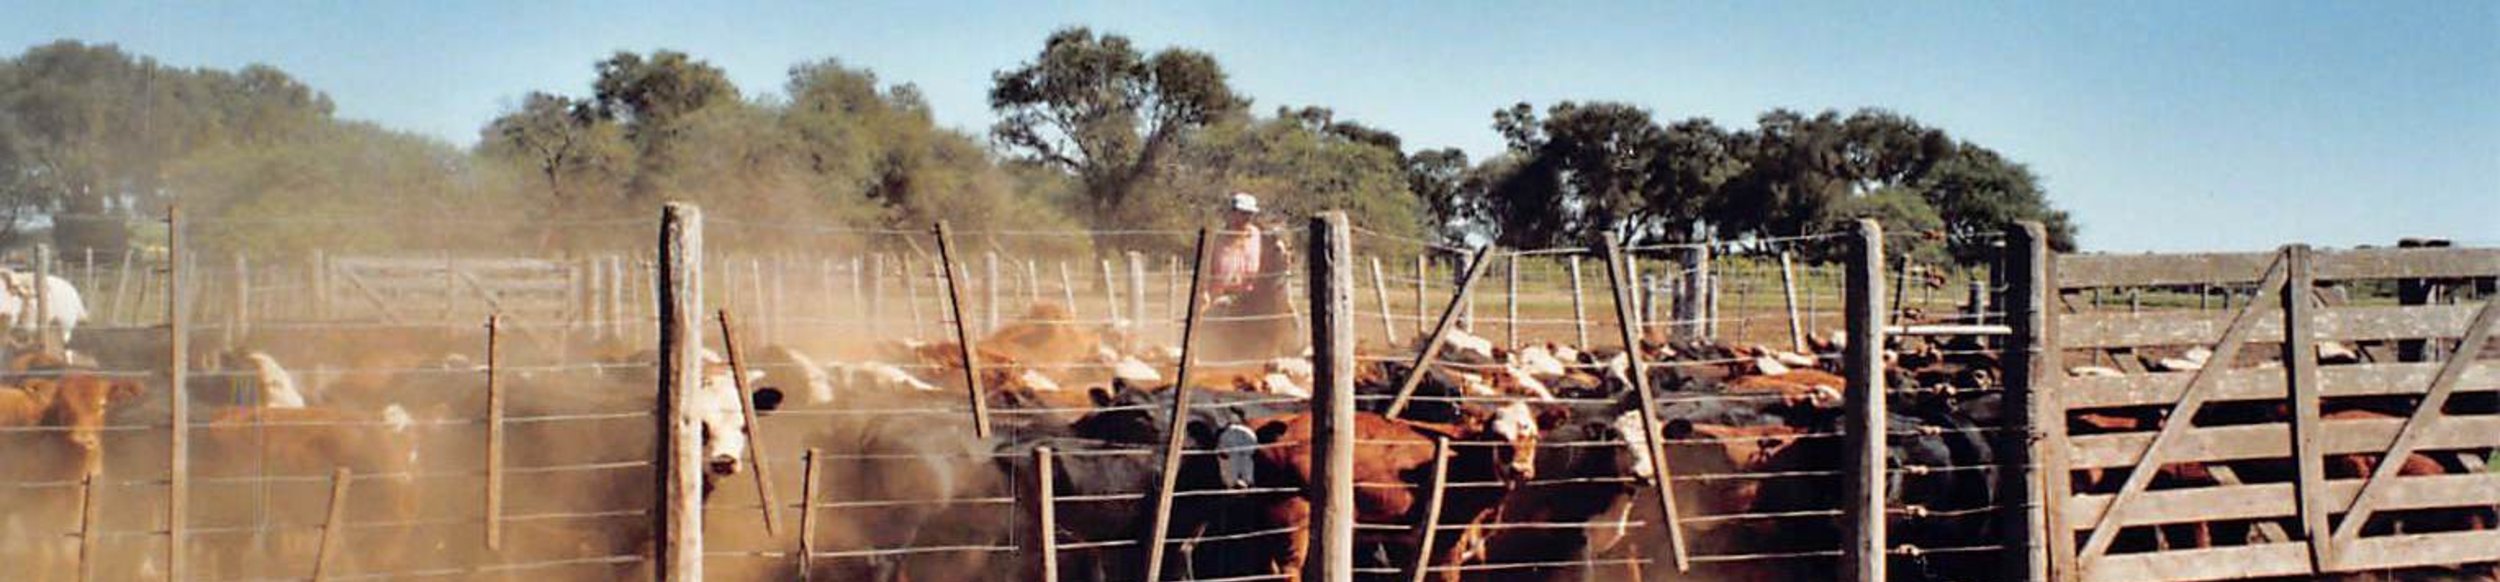 In 1980, Cono started grazing herds of cattle.